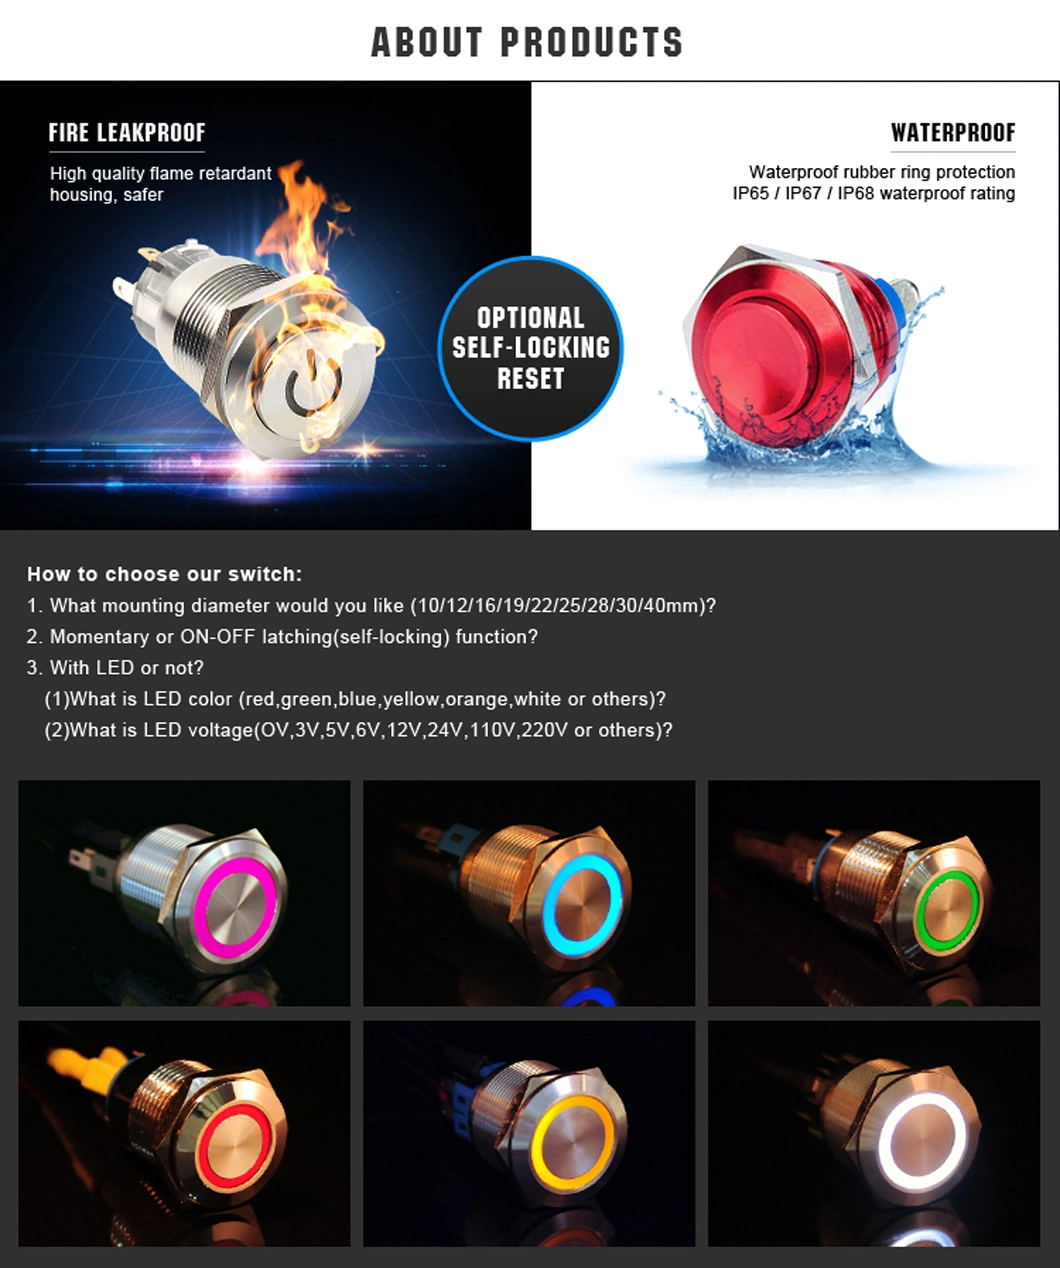 19mm Momentary LED Push Button Switch with Power Logo Lighted